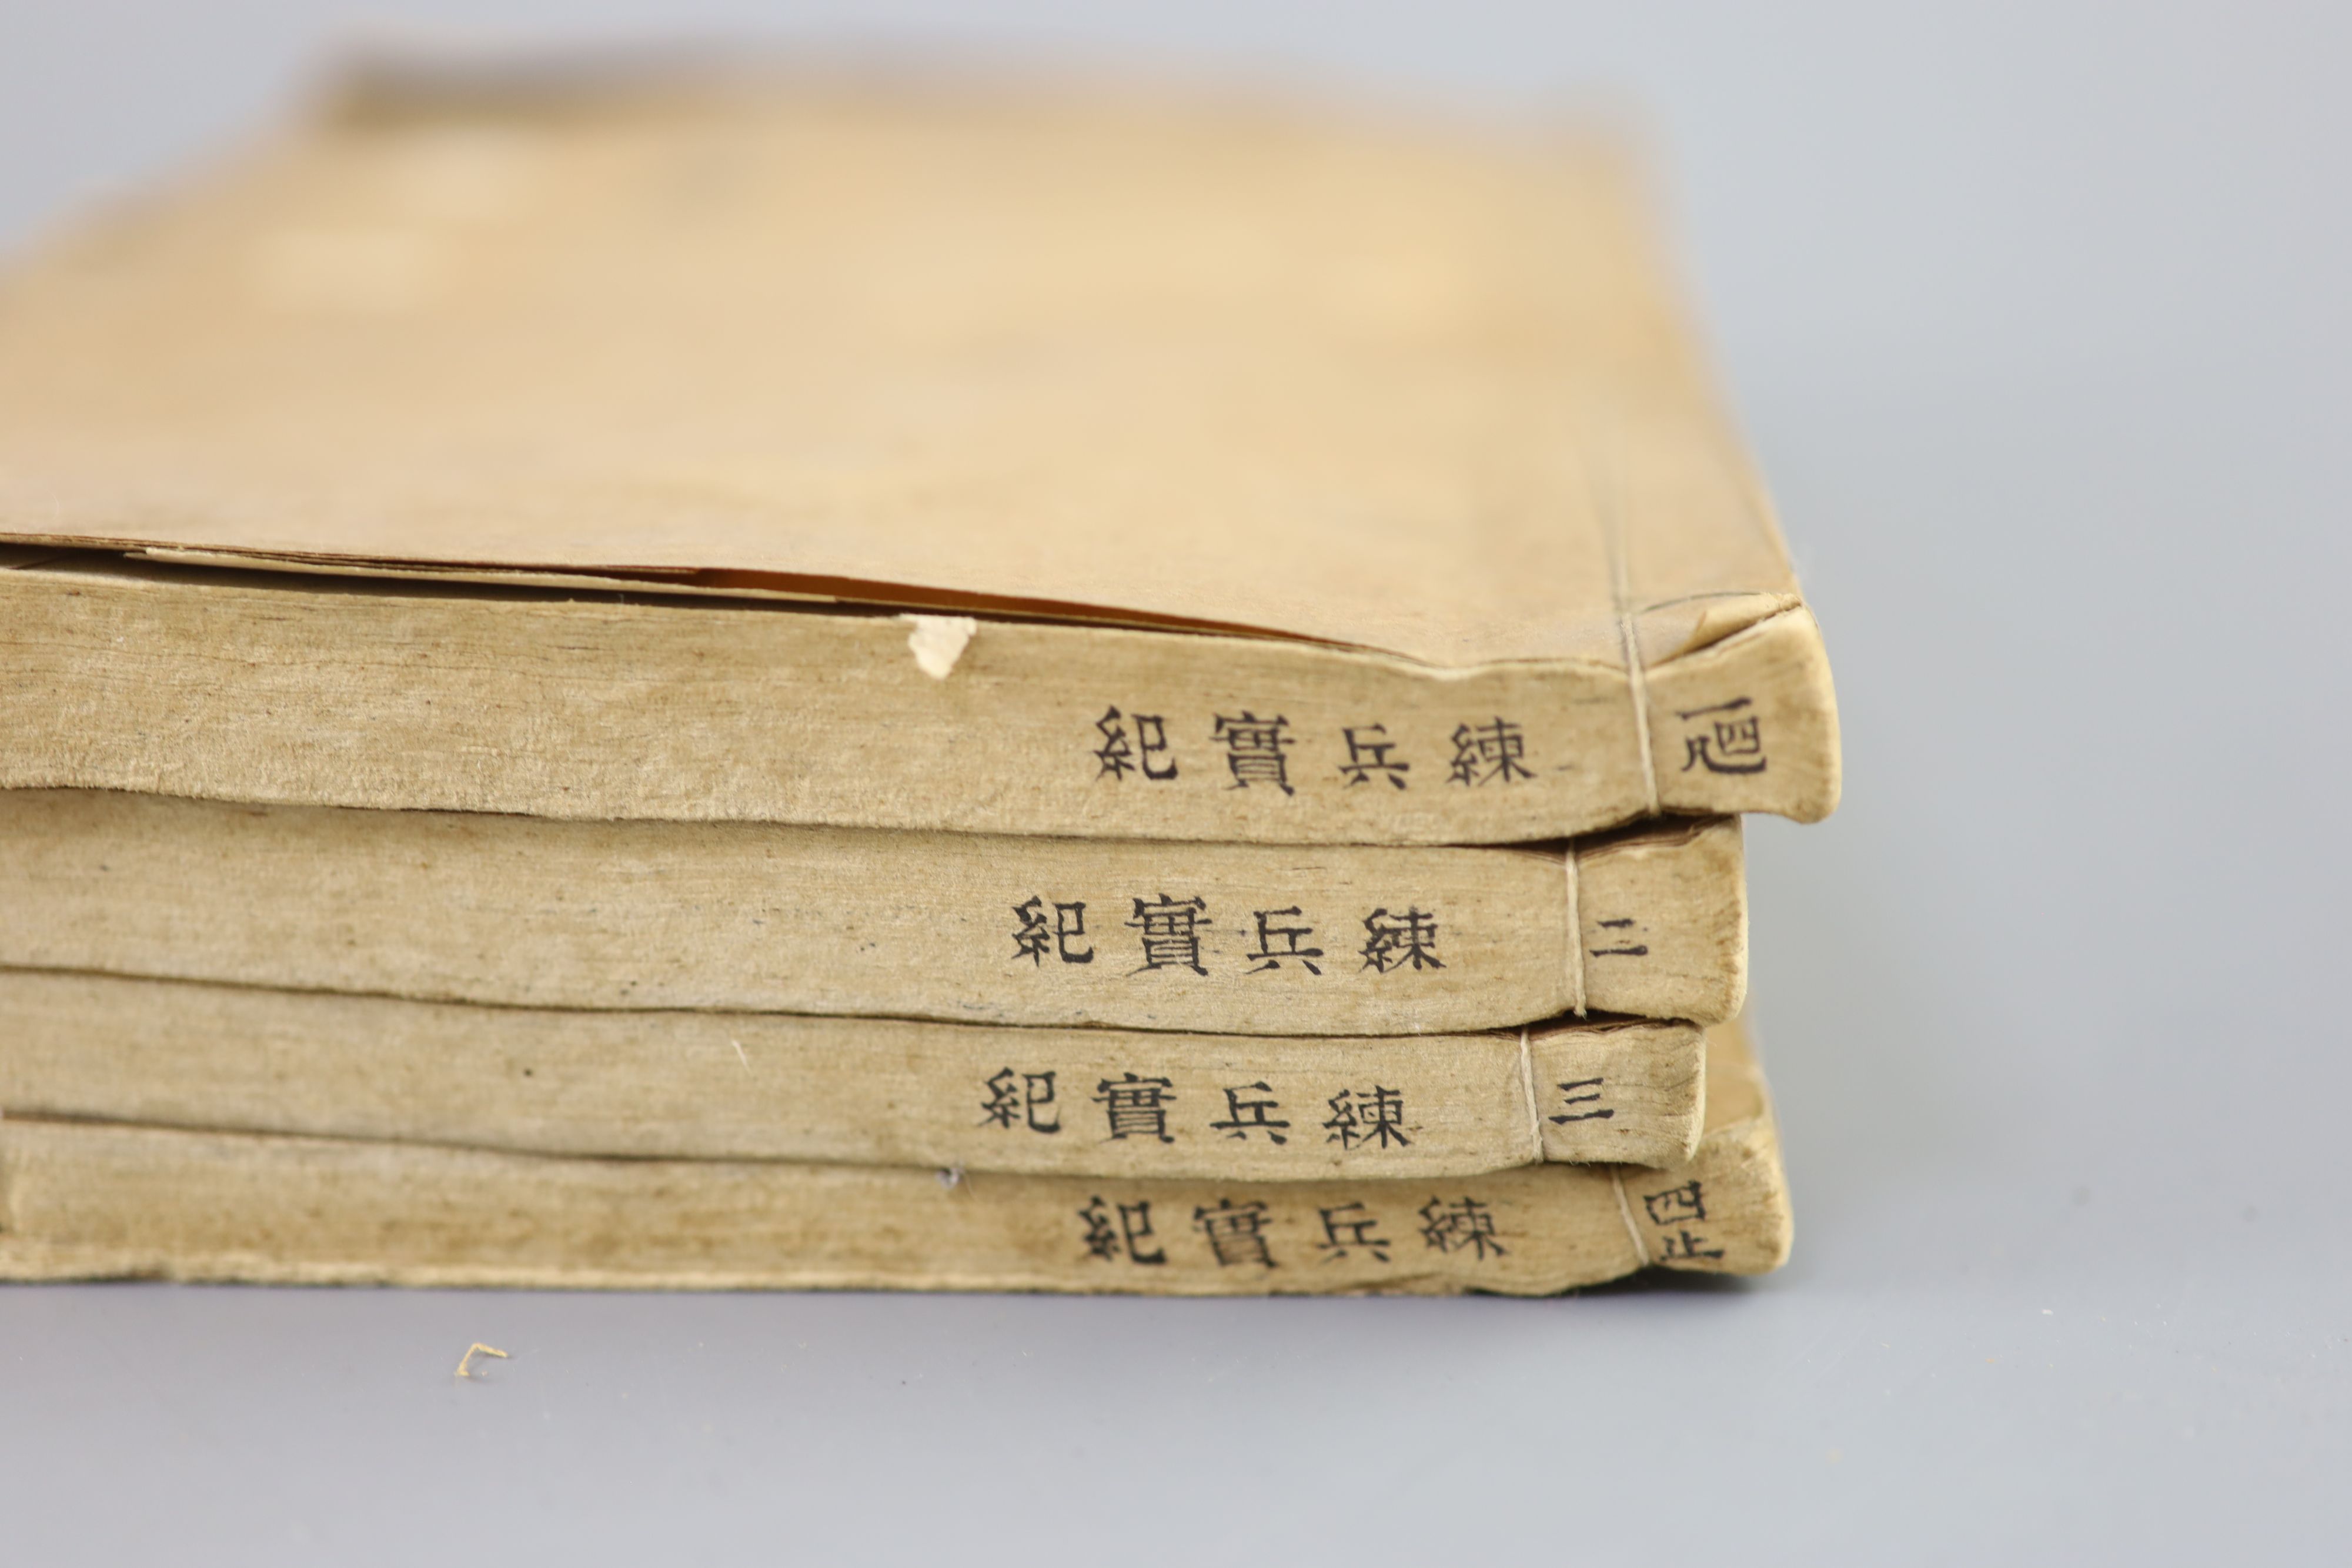 Chinese book, Jiguang Qi, Military Training: Authentic Records 'Lien ping shih chi', undated but probably Qing dynasty, Provenance - A. T. Arber-Cooke